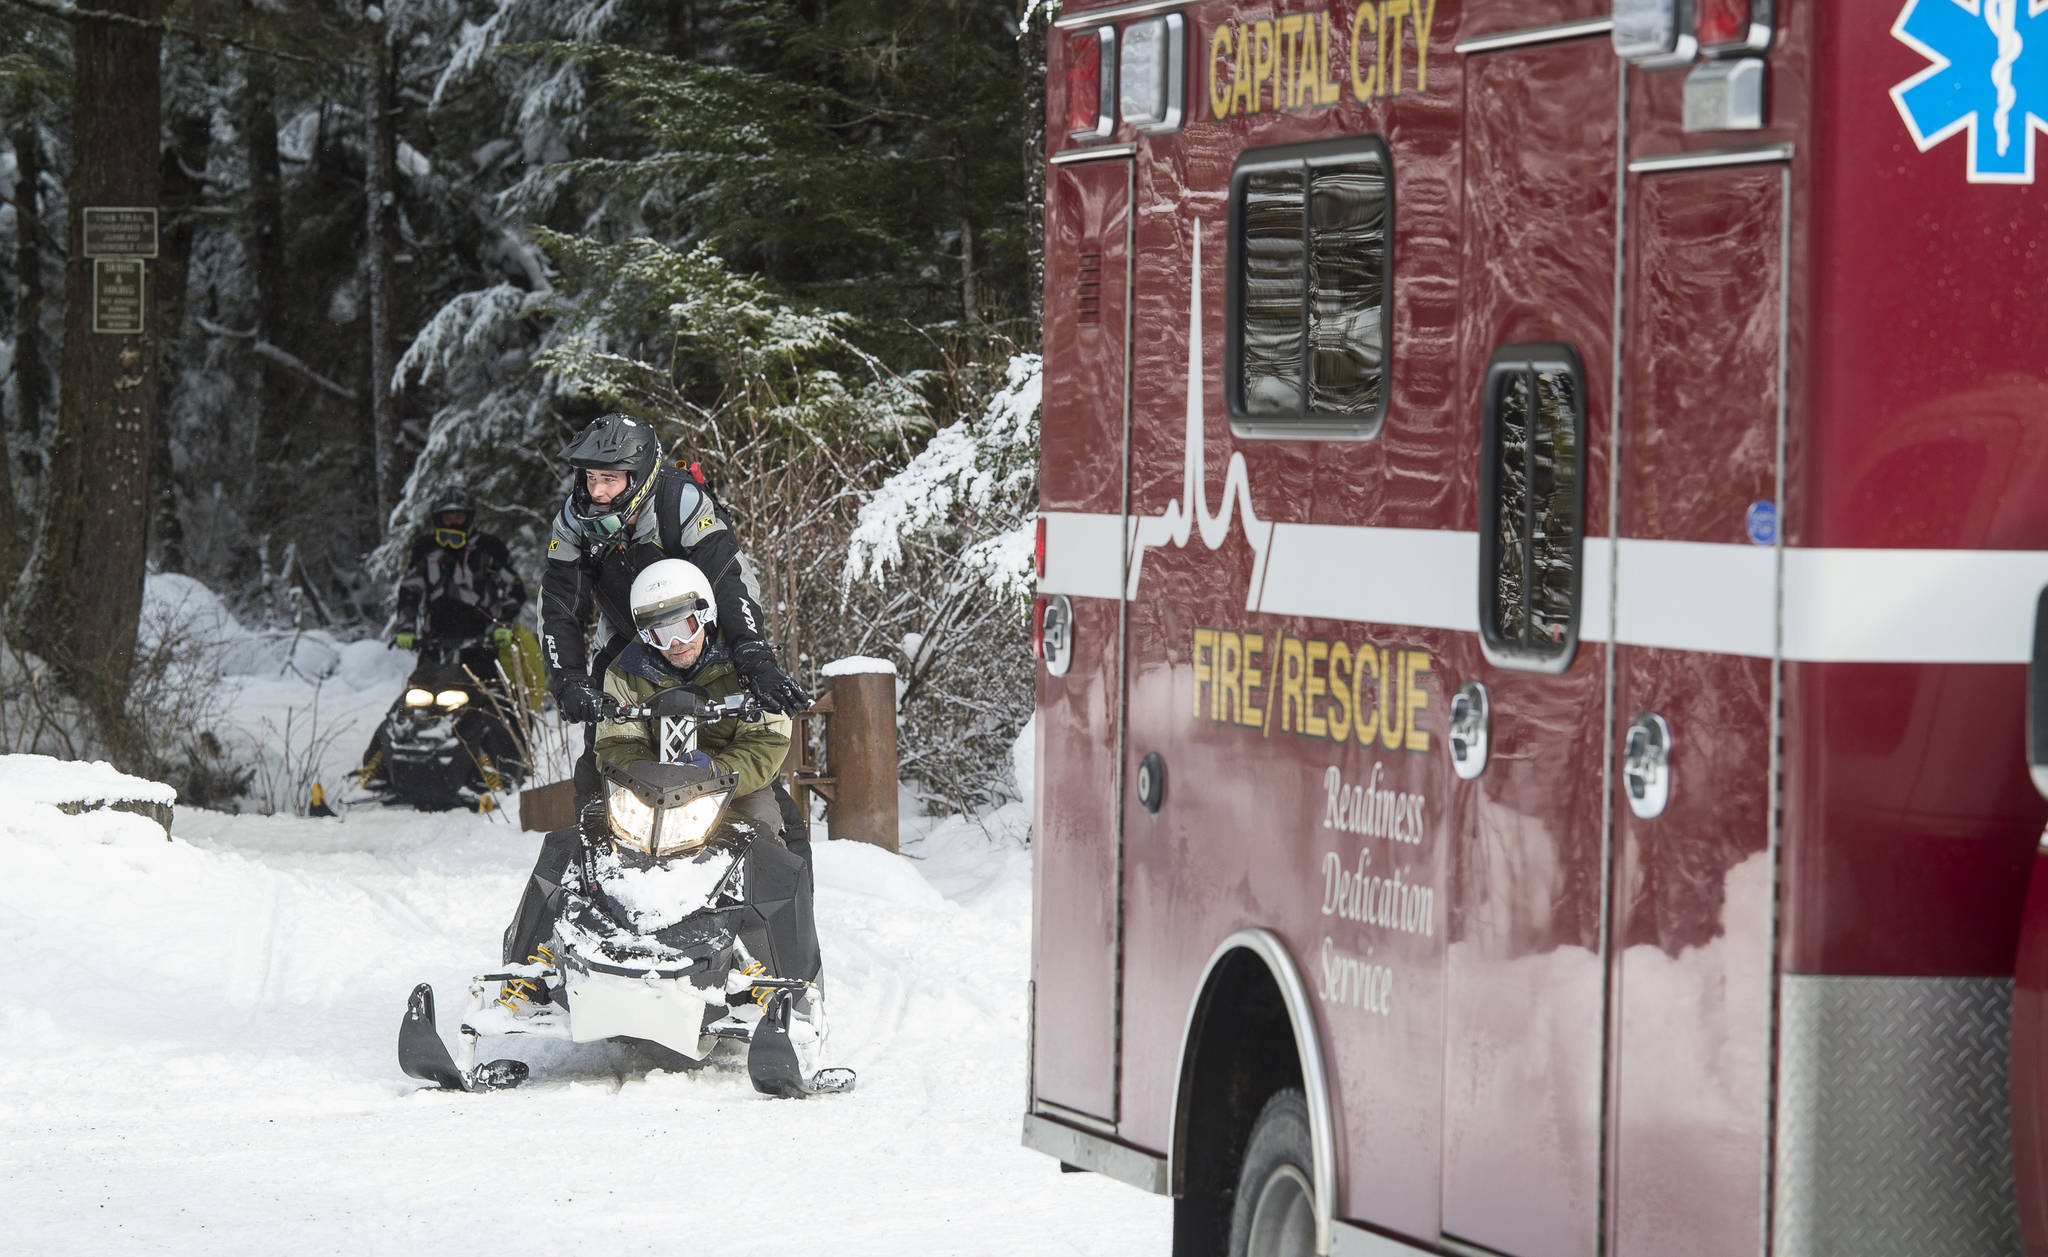 Capital City Fire/Rescue firefighter Blake Fleming and other members of CCFR’s rescue team arrive at the Spaulding Meadows snowmachine trail with a man rescued from the John Muir Cabin on Wednesday, Feb. 28, 2018. The man was said to have had a medical issue. Juneau Snowmobile Club members helped in the rescue. (Michael Penn | Juneau Empire)